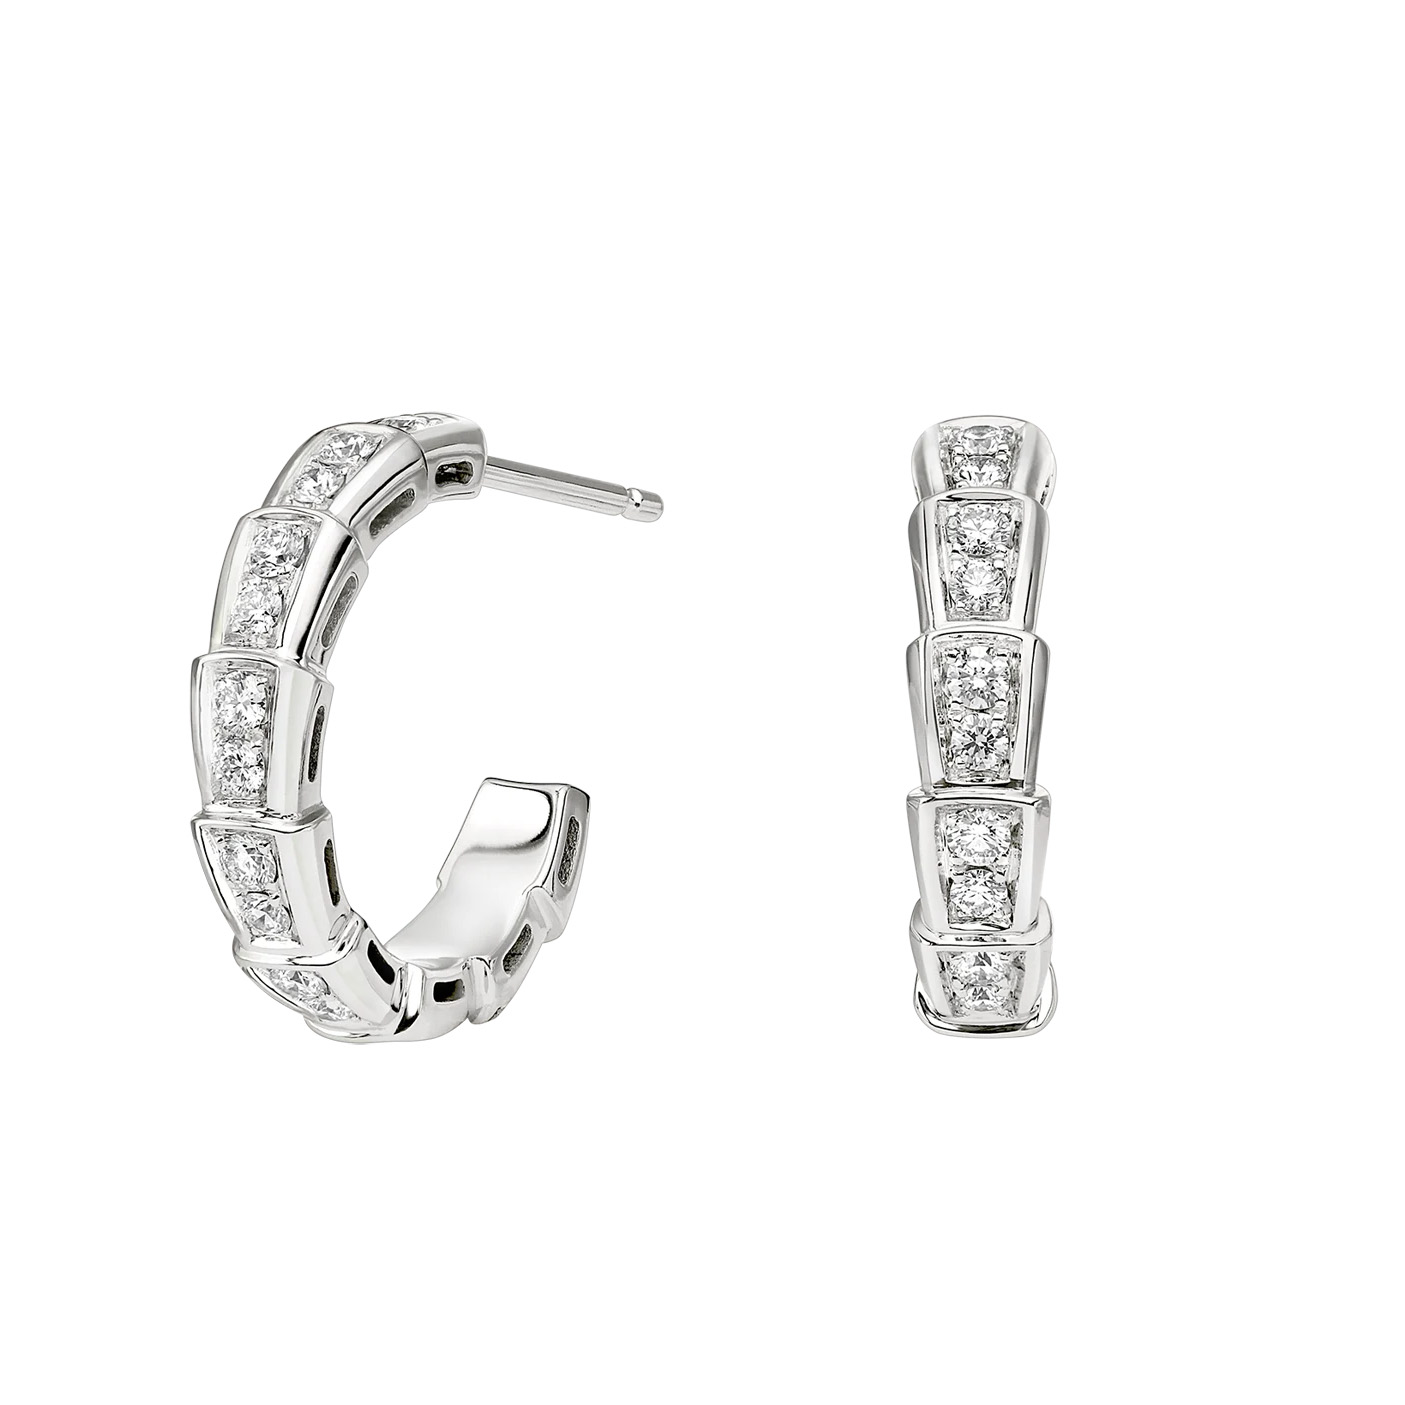 Wholesale OEM made design 18 kt white gold earrings set with pavé diamonds OEM/ODM Jewelry custom jewelry manufacturers china